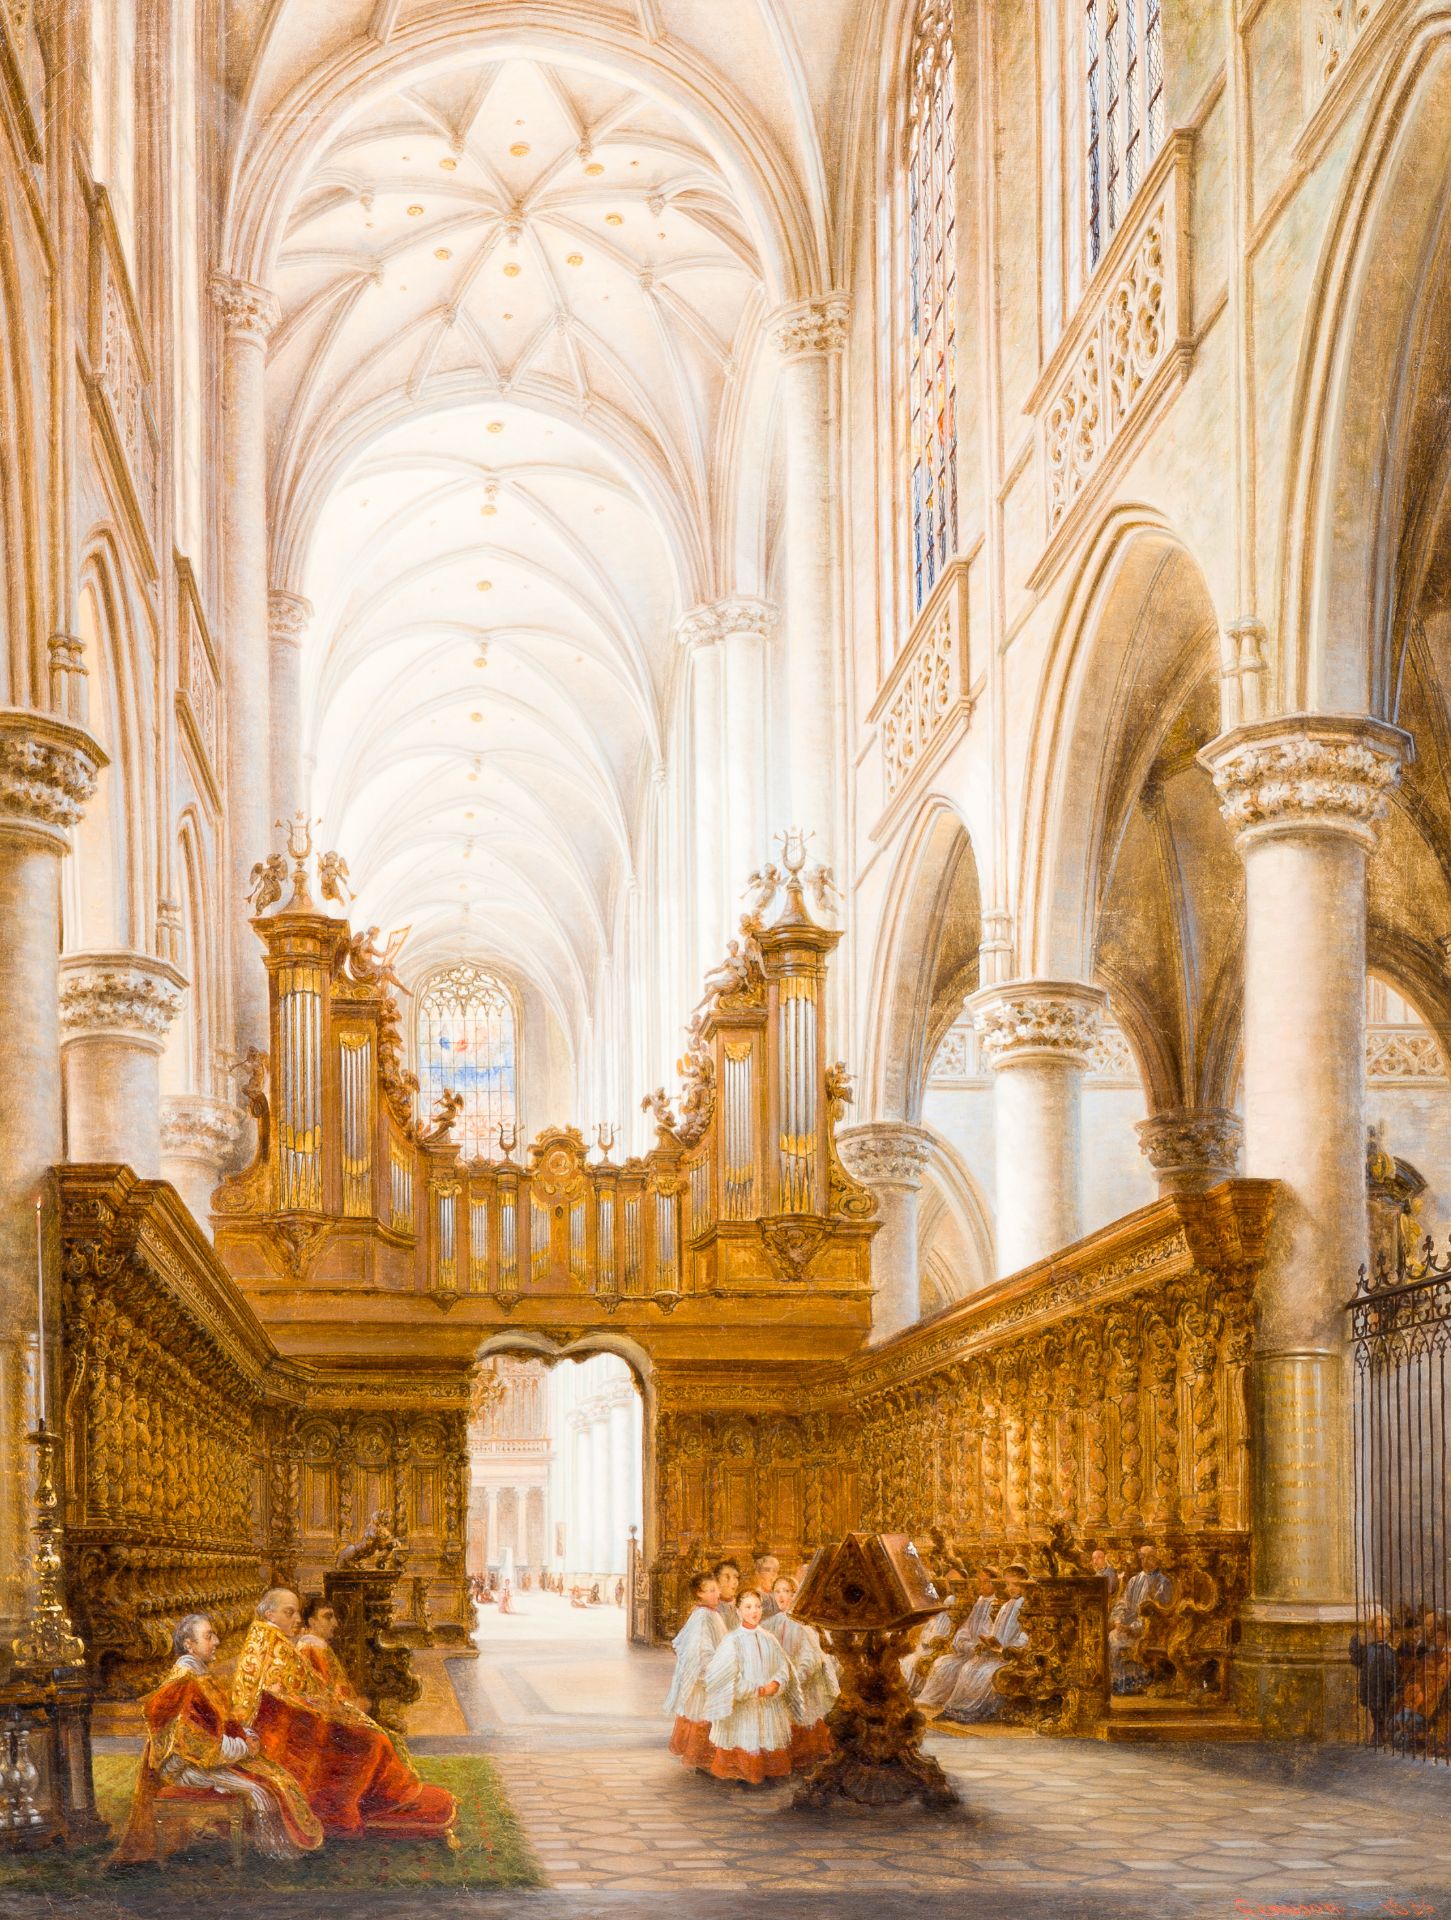 Jules Victor Genisson (1805-1860): Interior of the St. James' Church in Antwerp, oil on canvas, date